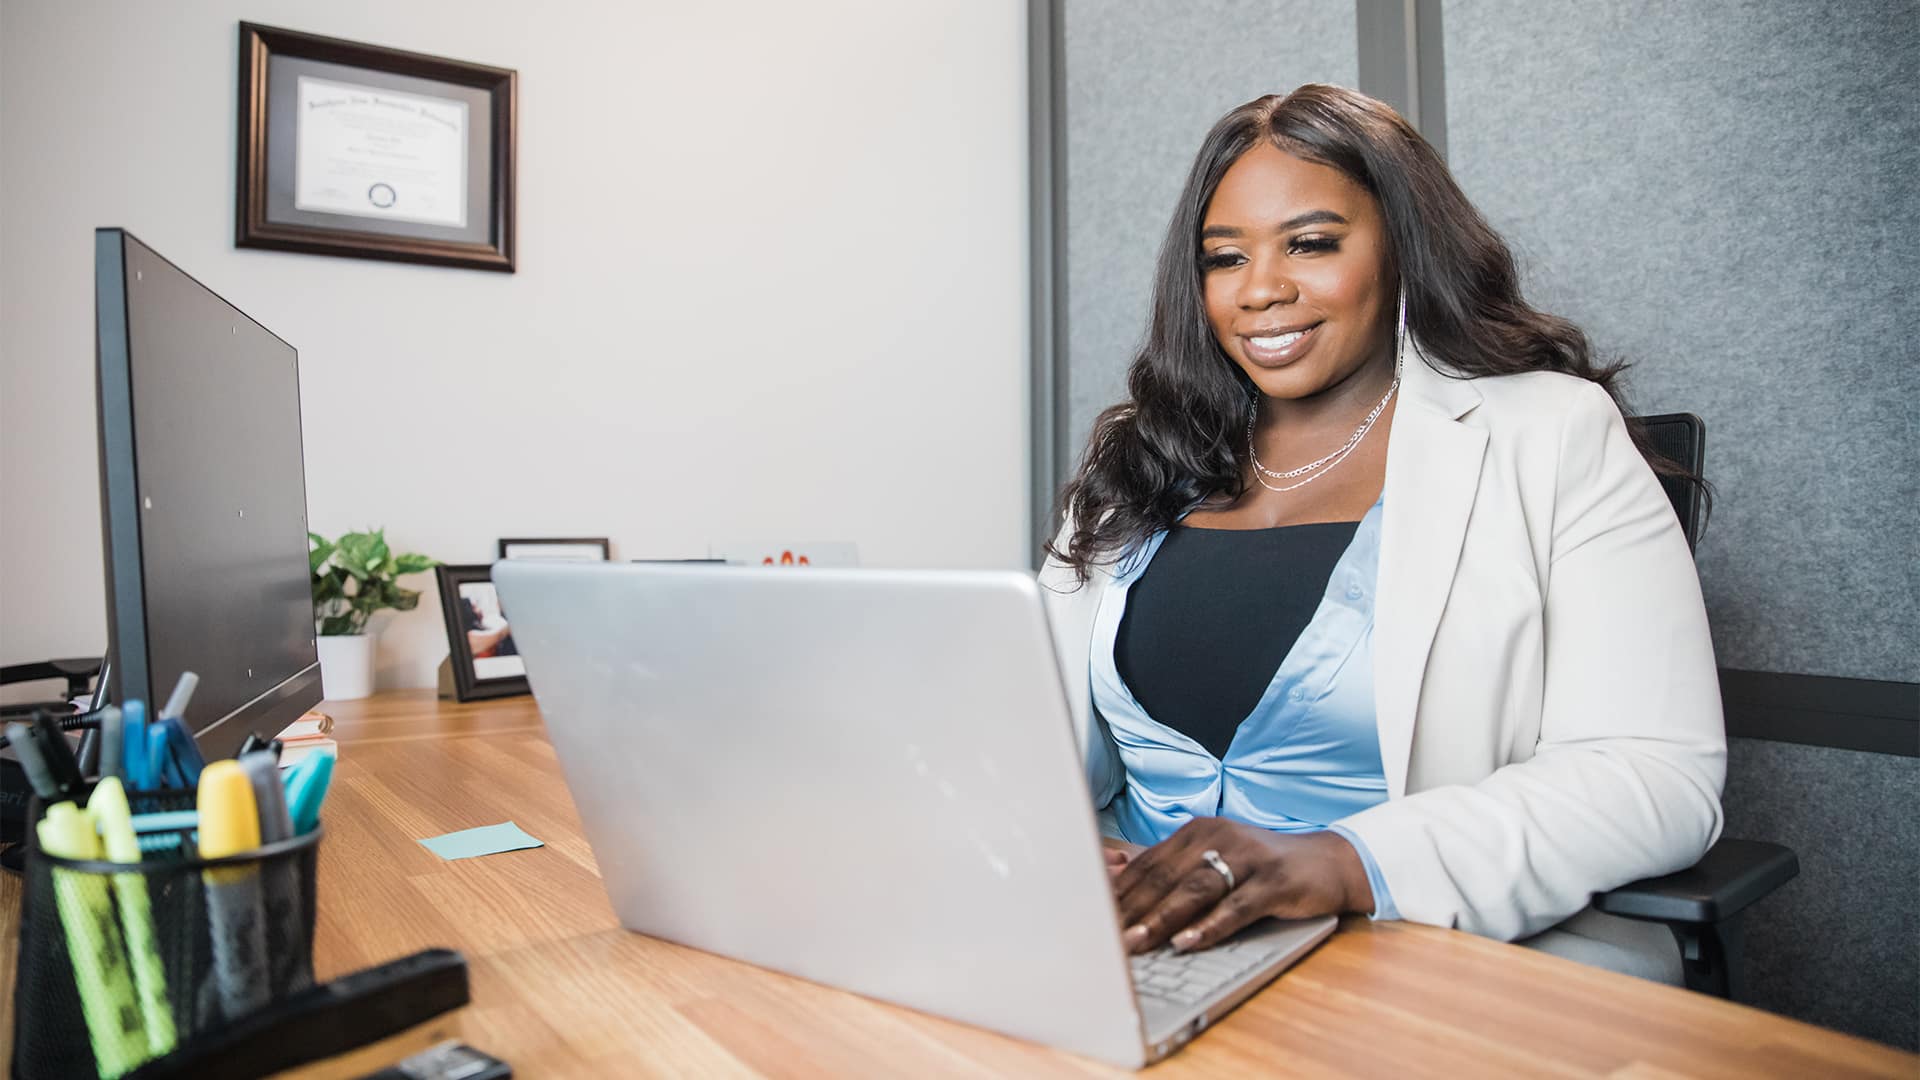 Tanzania Fair, who earned her degree from SNHU in 2020, sitting in an office working on a laptop with her framed diploma on the wall in the background.